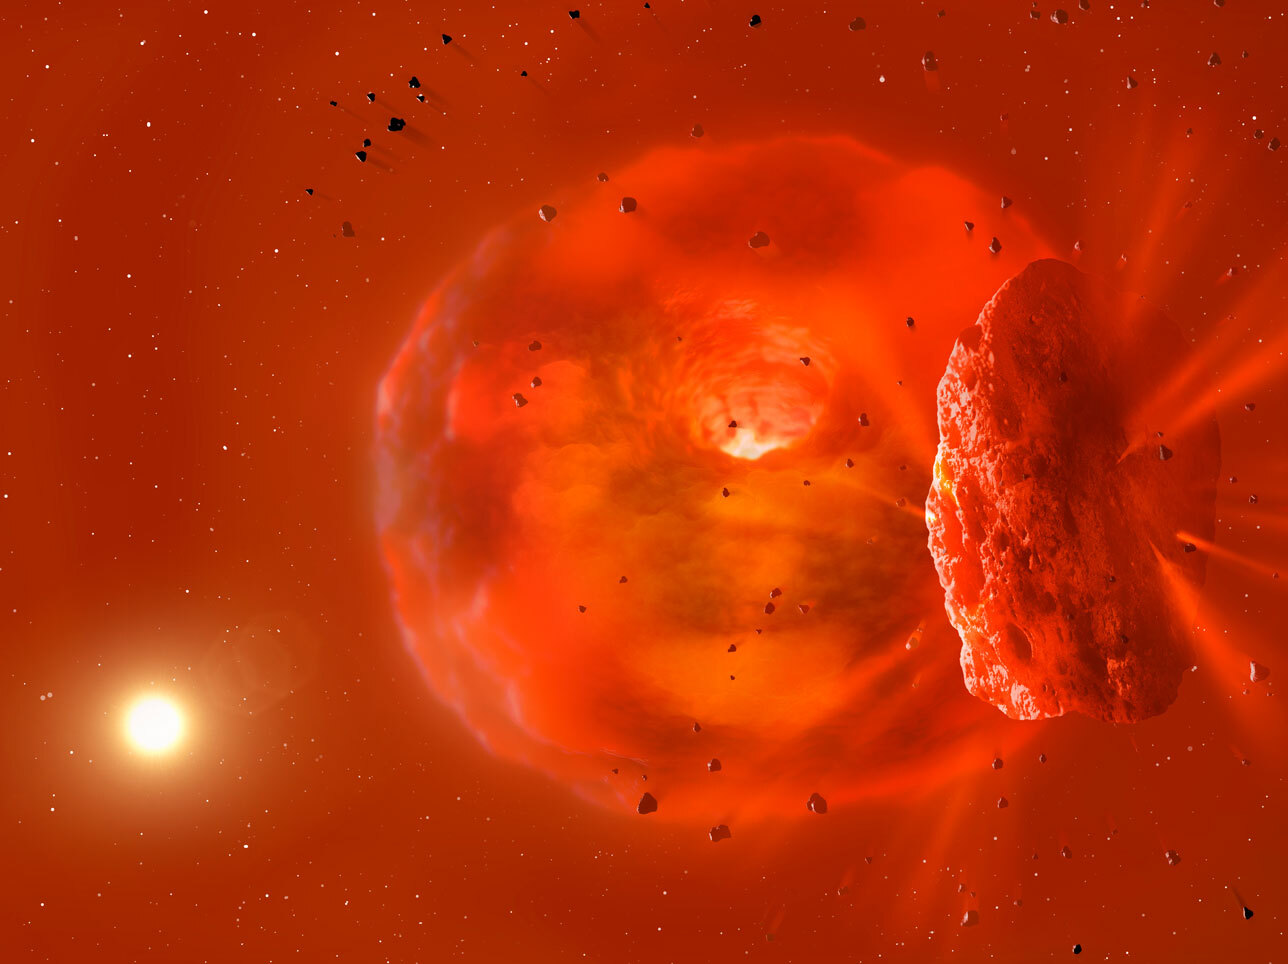 An artist's concept illustration shows two large planet-sized objects colliding in space to the right of a bright star. The area is bathed in an orange glow.